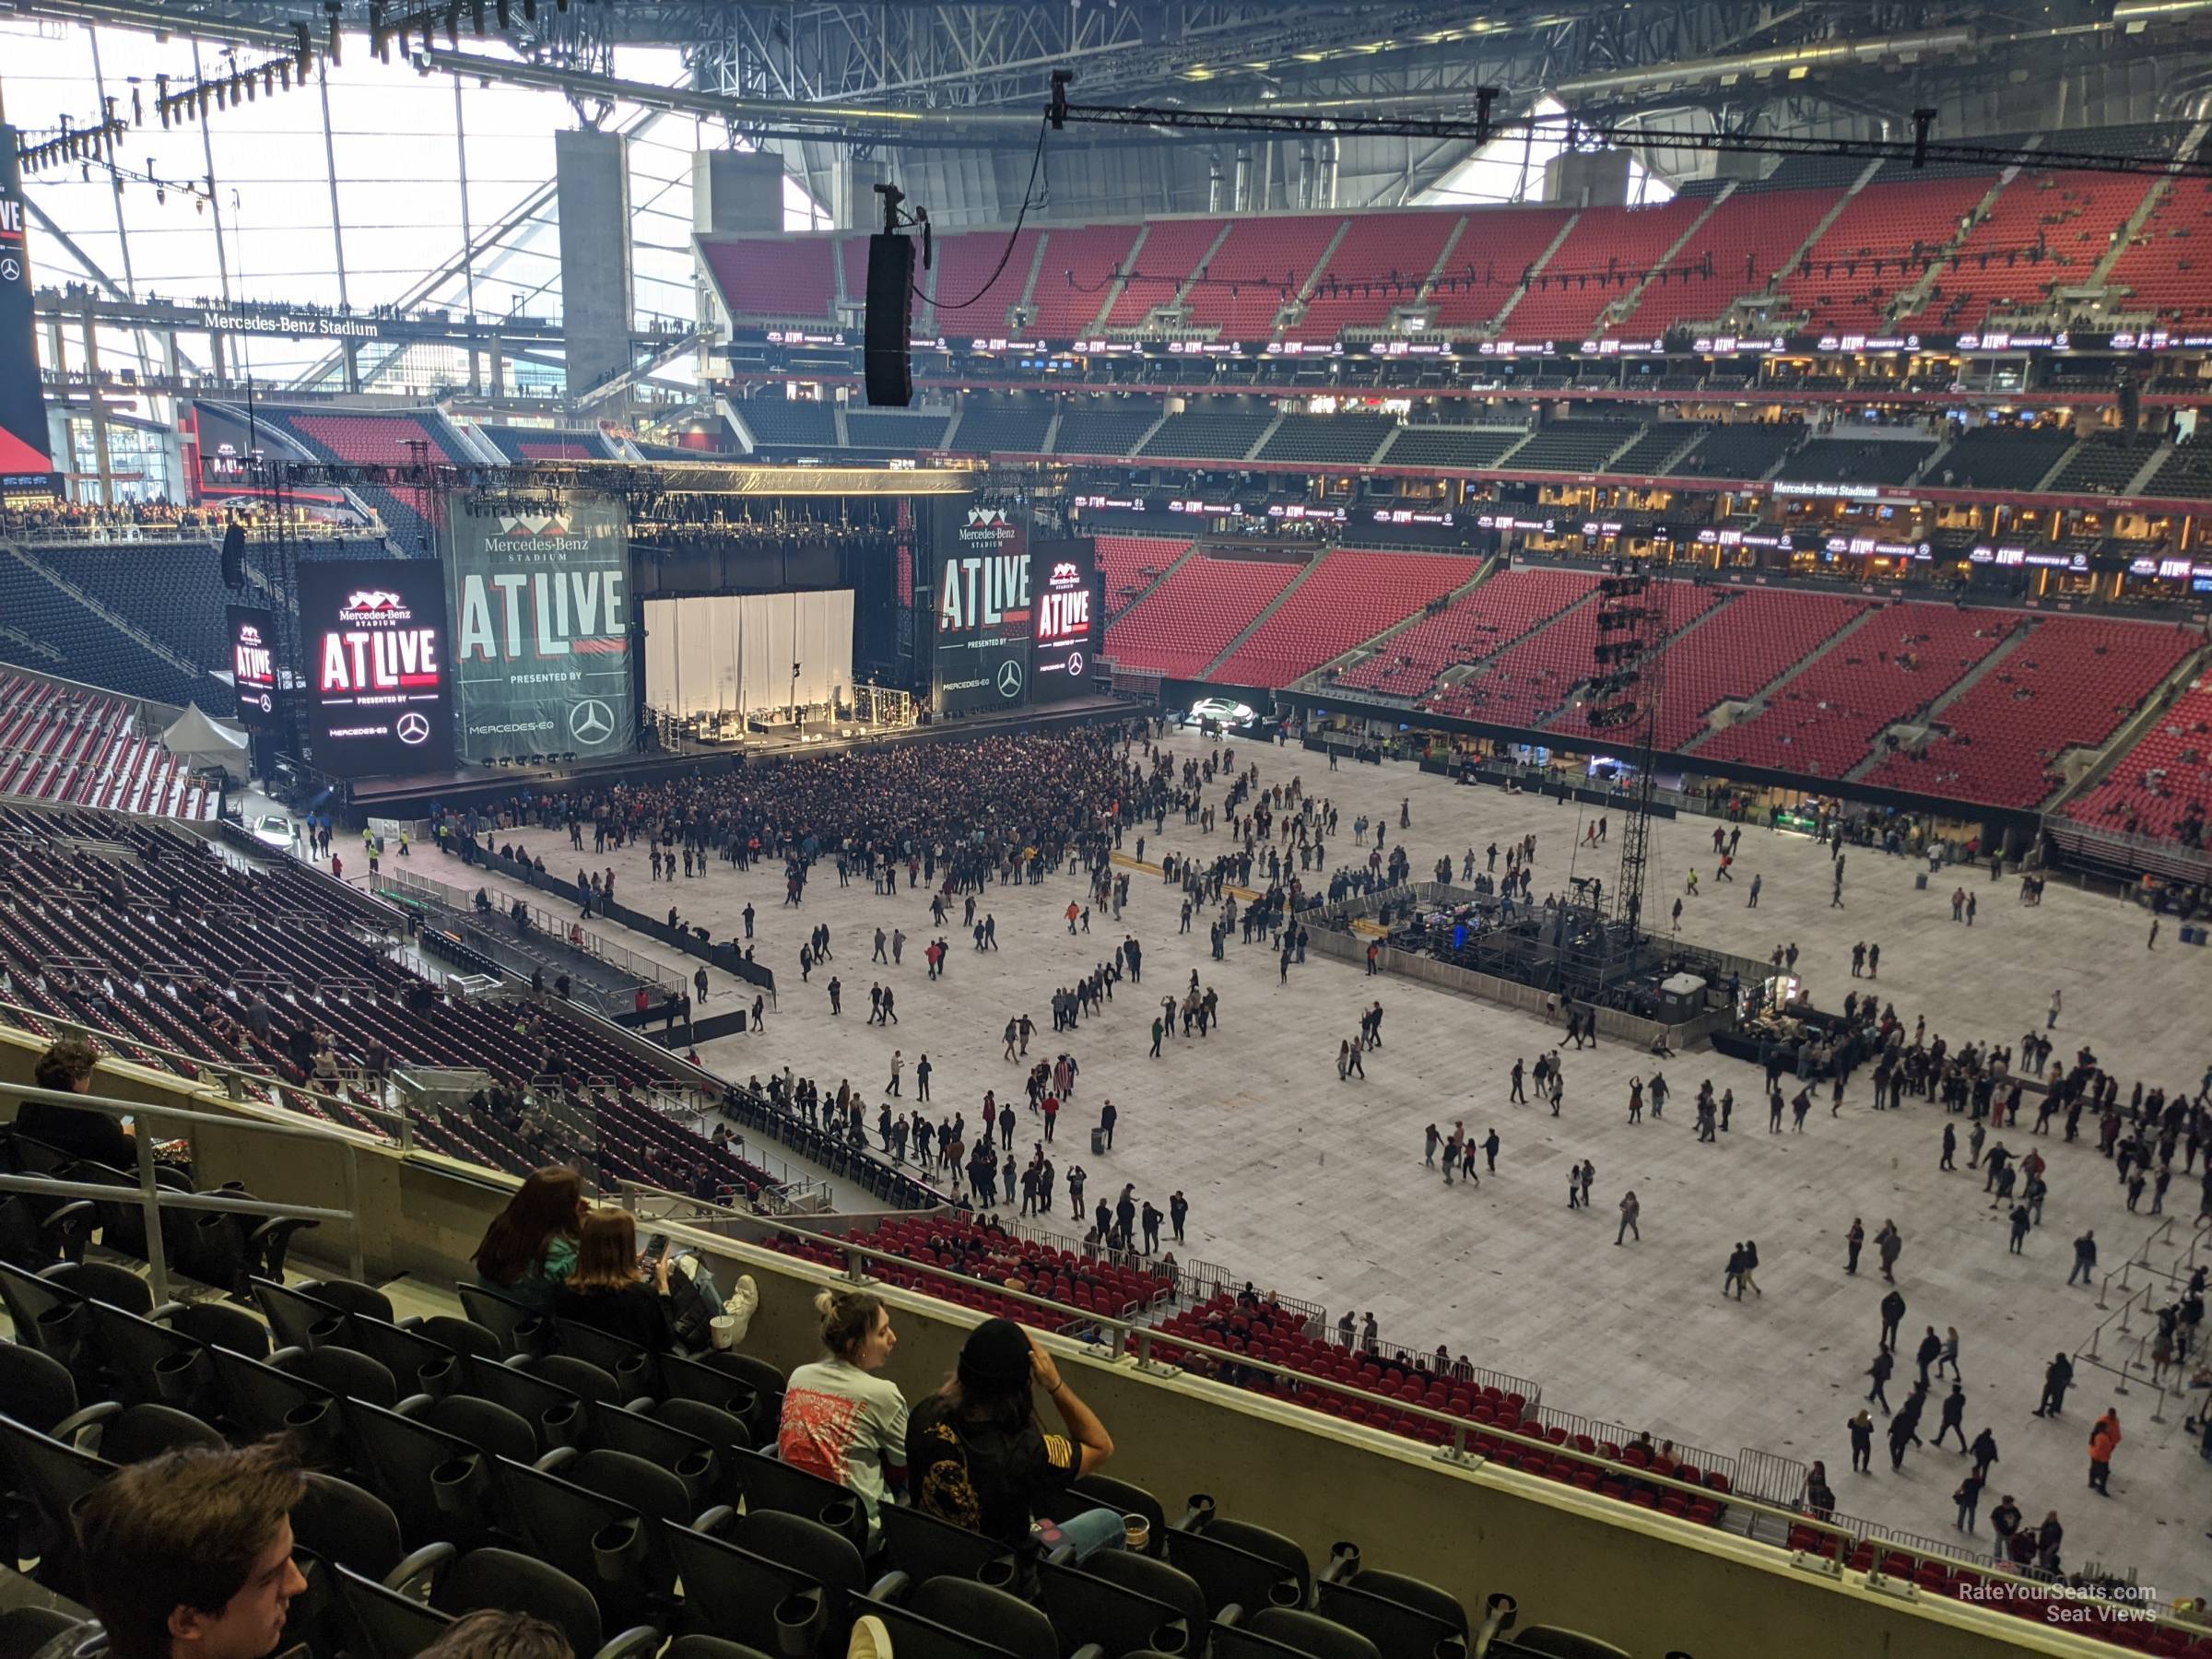 section 231, row 5 seat view  for concert - mercedes-benz stadium